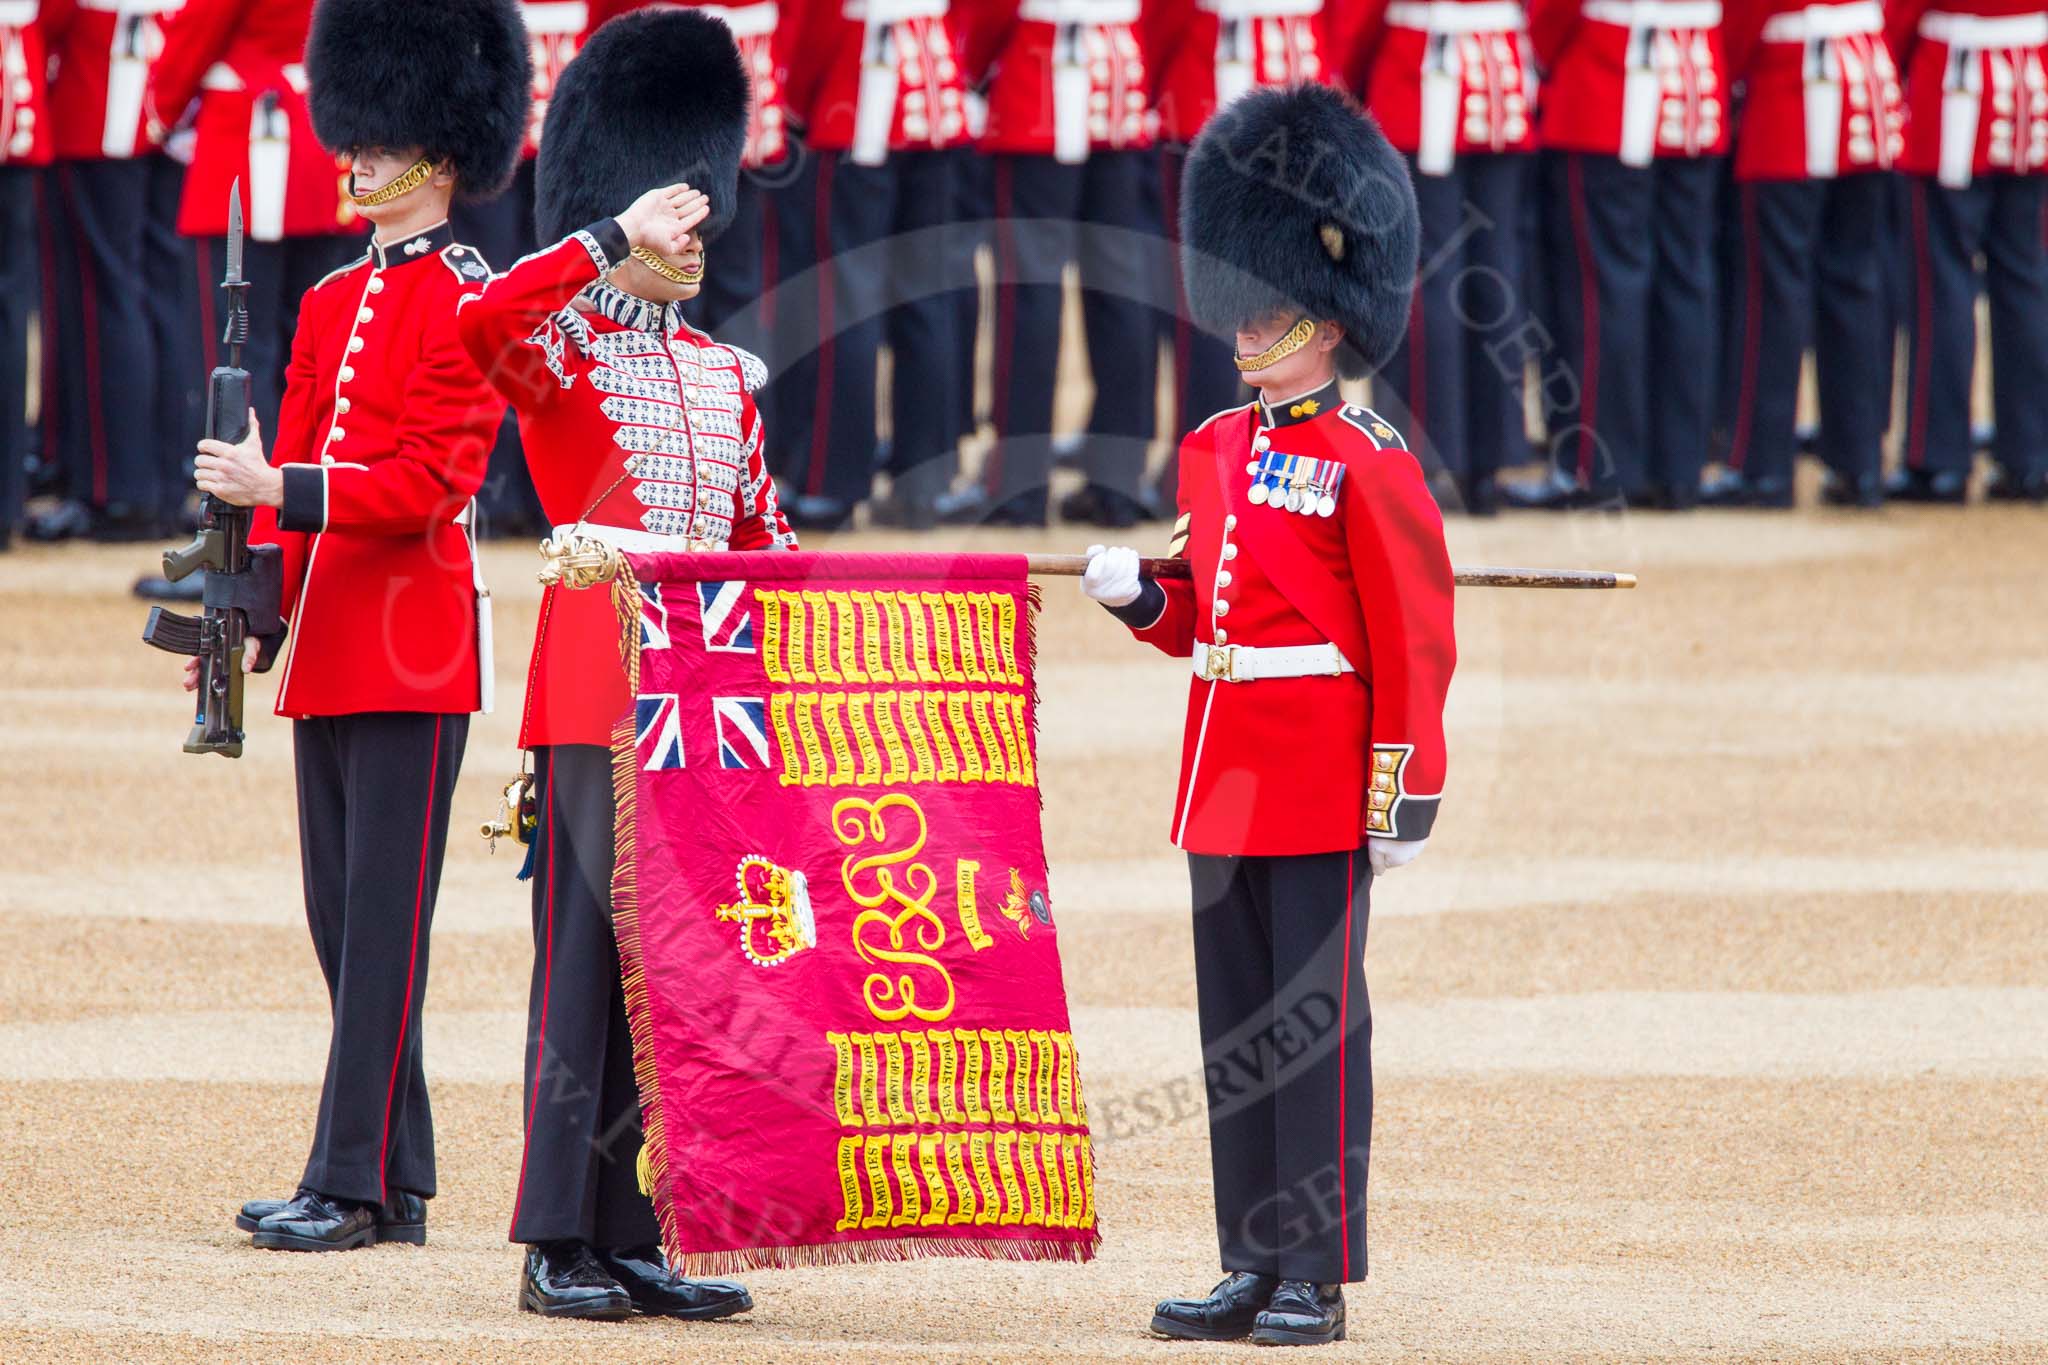 Trooping the Colour 2014.
Horse Guards Parade, Westminster,
London SW1A,

United Kingdom,
on 14 June 2014 at 10:32, image #197